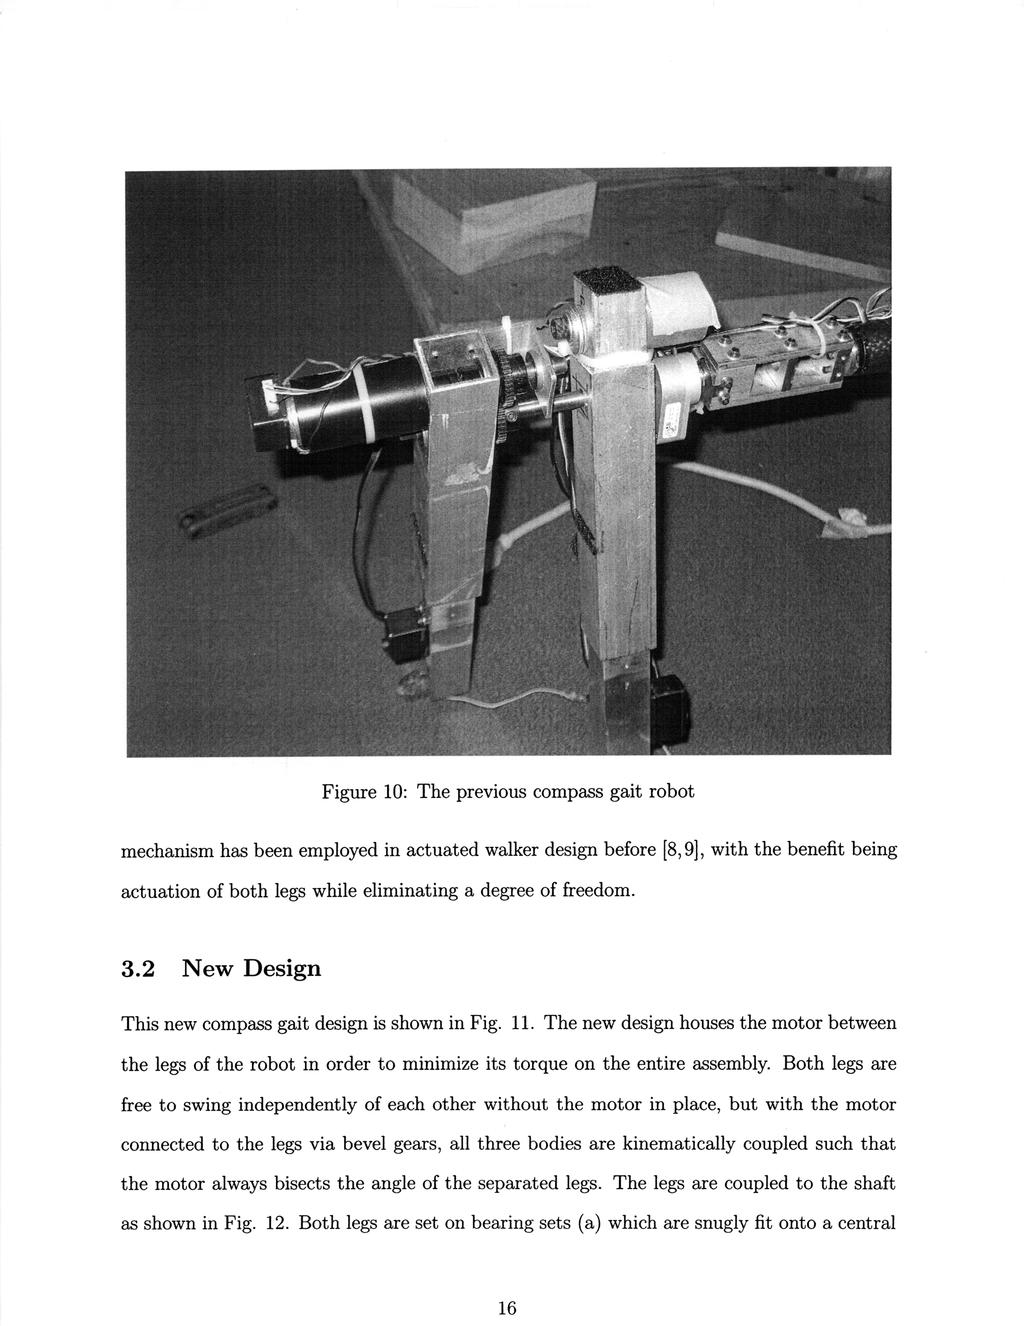 Figure 10: The previous compass gait robot mechanism has been employed in actuated walker design before [8,9], with the benefit being actuation of both legs while eliminating a degree of freedom. 3.